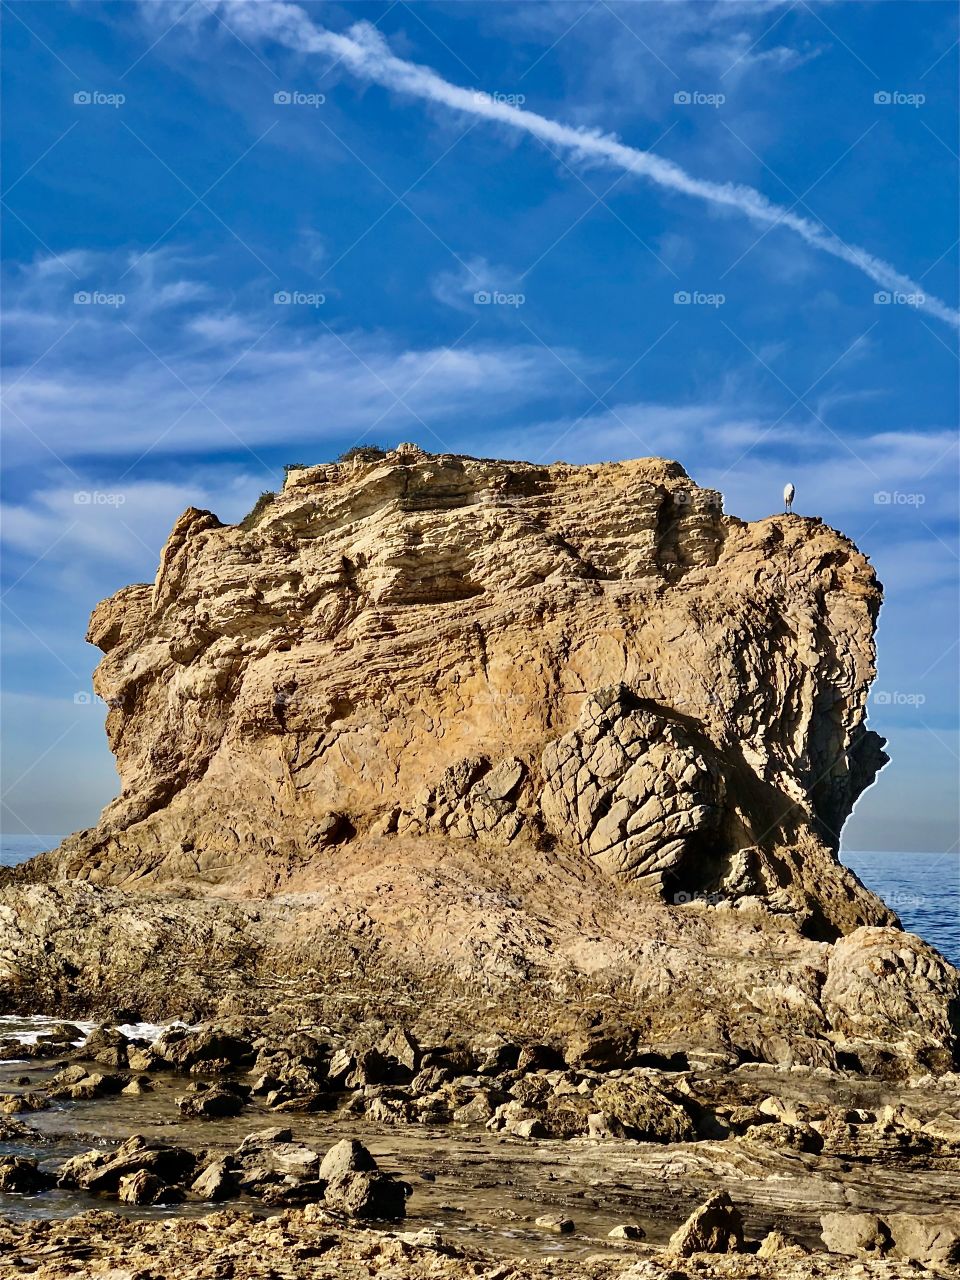 Foap Mission Vertical Captures! Stunning Coastal Seascape Rock Formation With  Brilliant Blue Skies And Clouds!